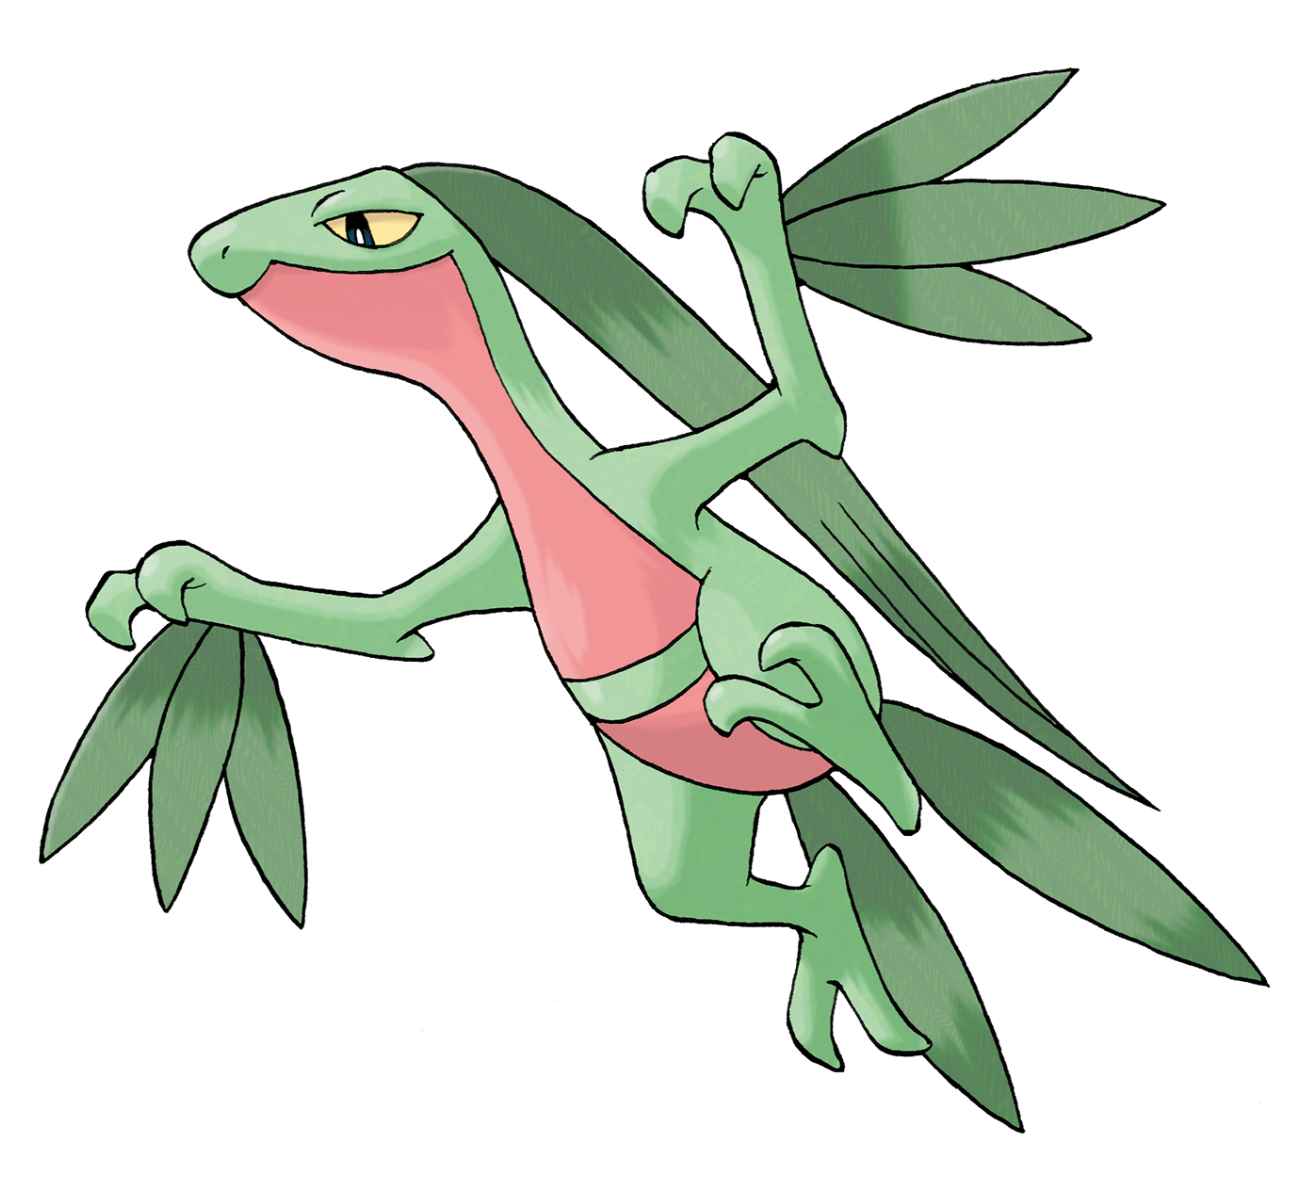 http://images3.wikia.nocookie.net/__cb20080908155633/es.pokemon/images/6/6a/Grovyle.png